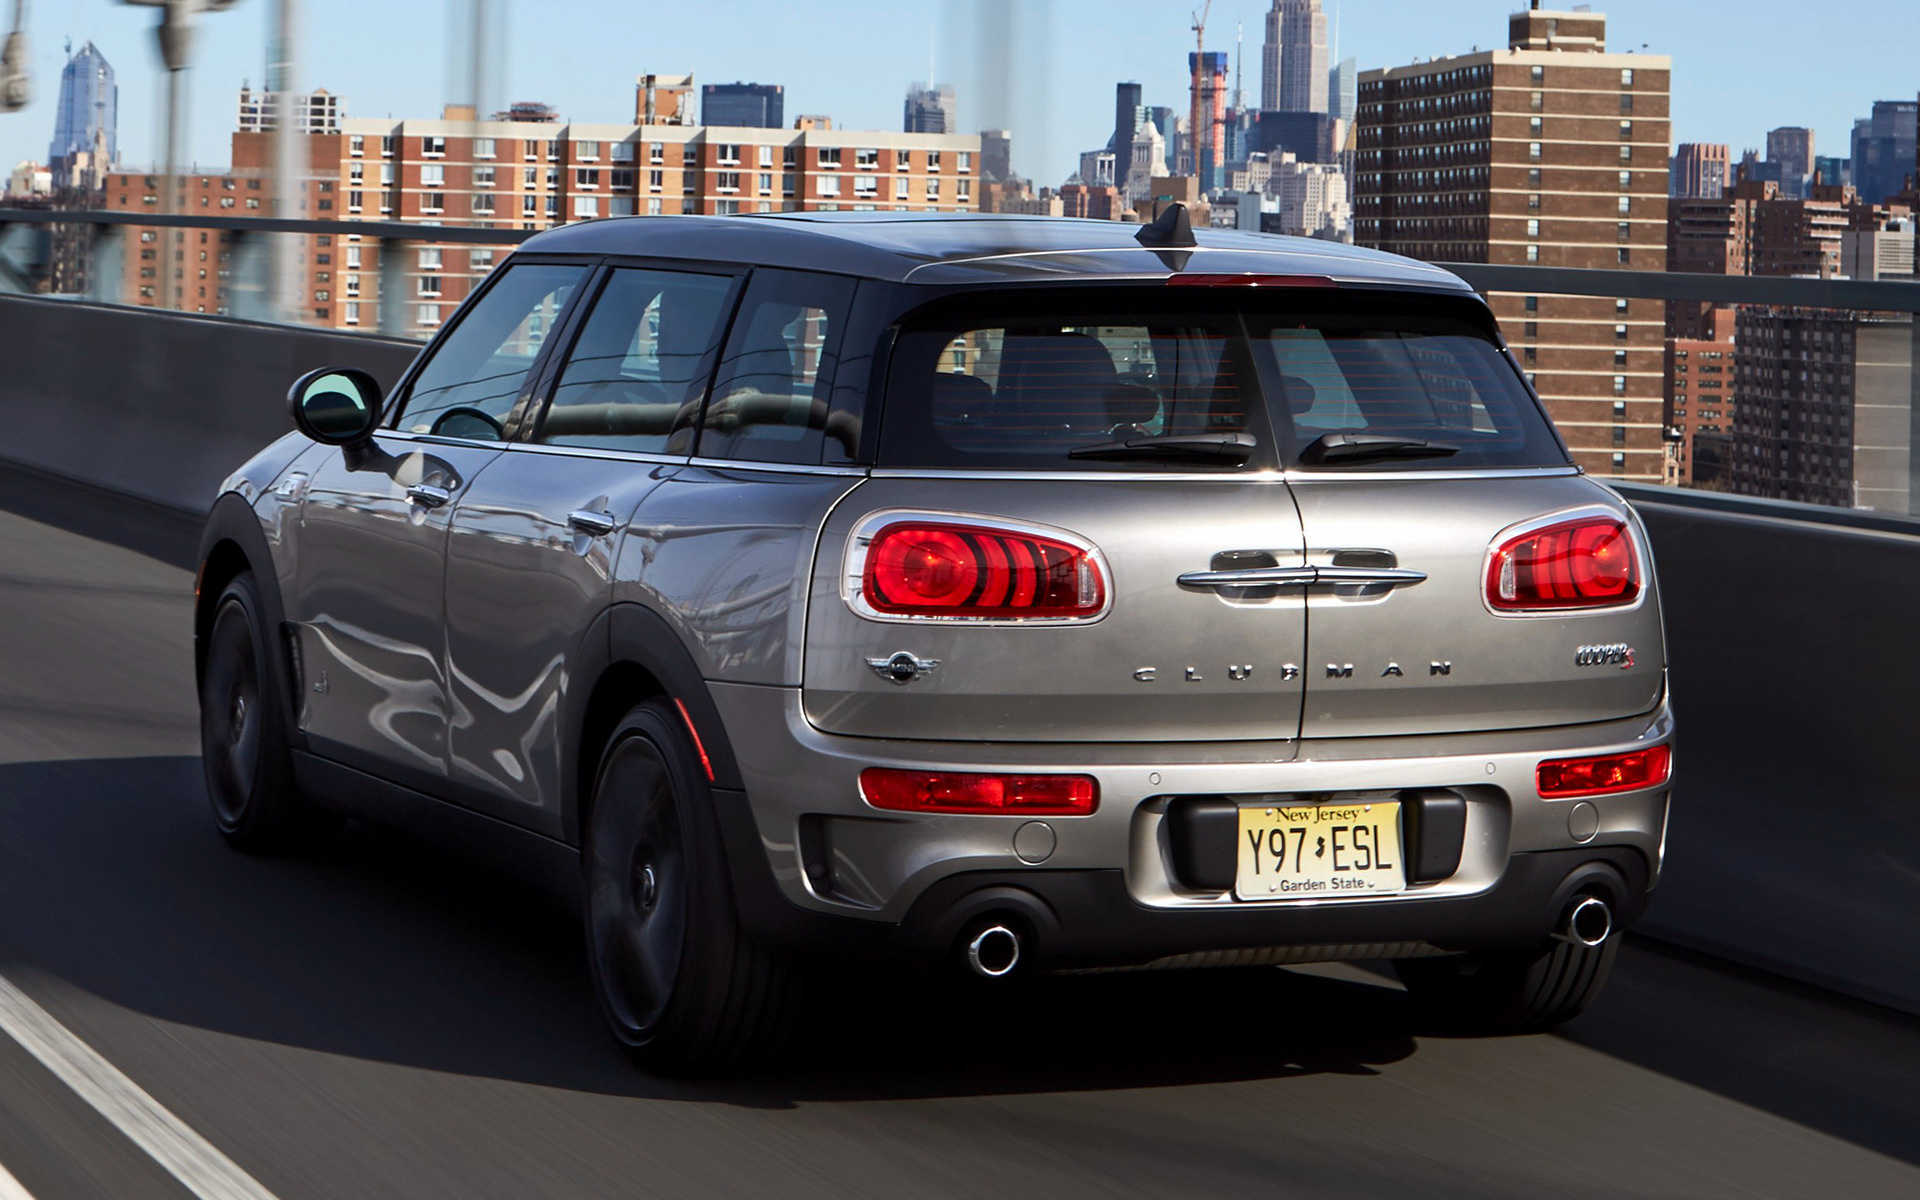 Mini Cooper S Clubman (2017) US Wallpapers and HD Images